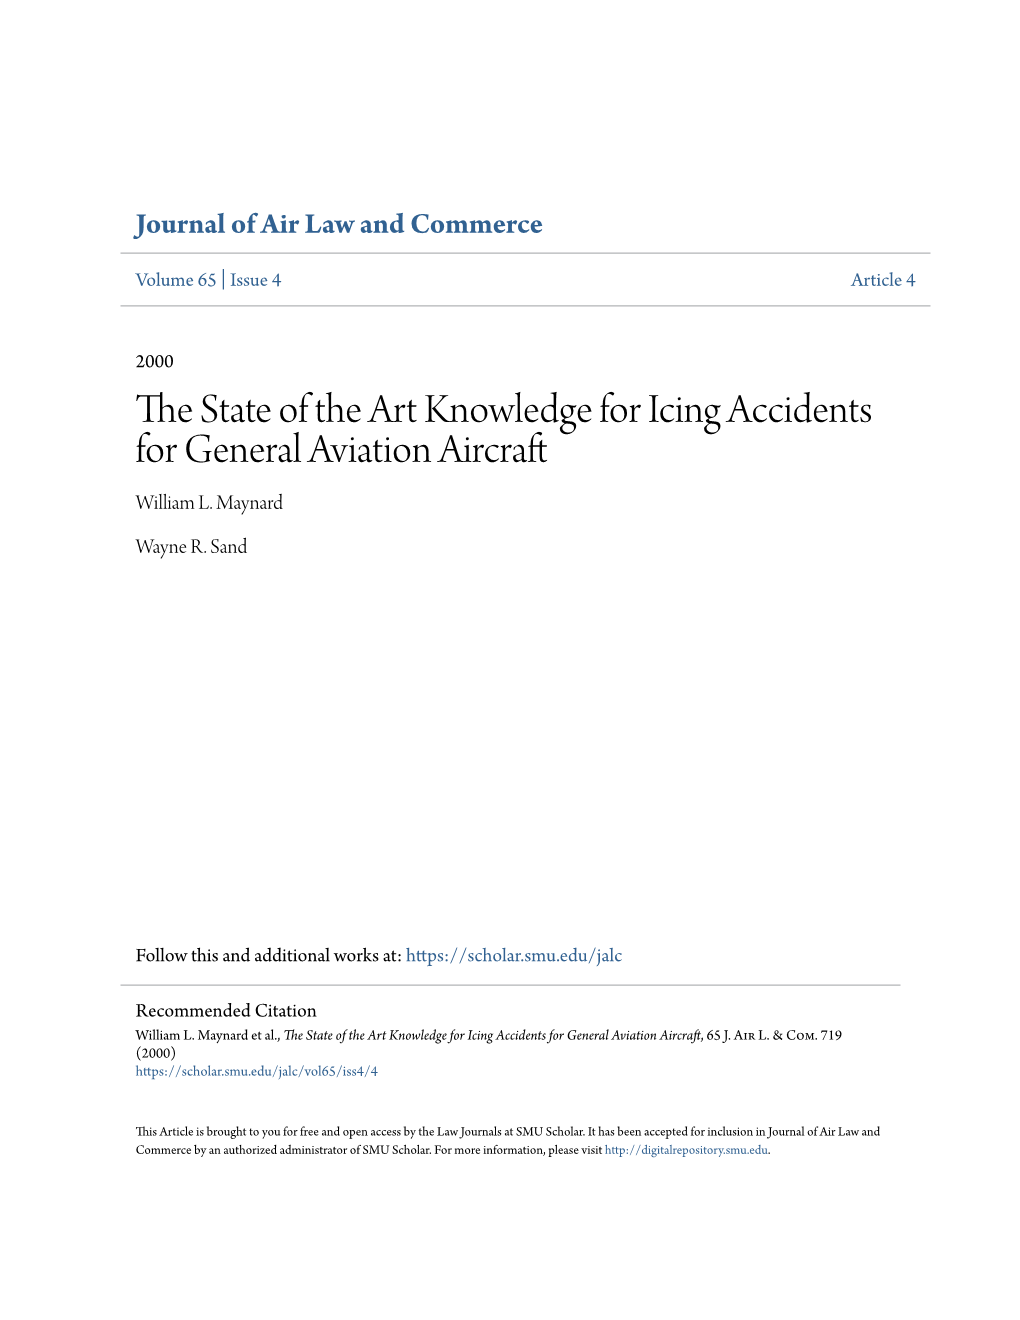 The State of the Art Knowledge for Icing Accidents for General Aviation Aircraft, 65 J